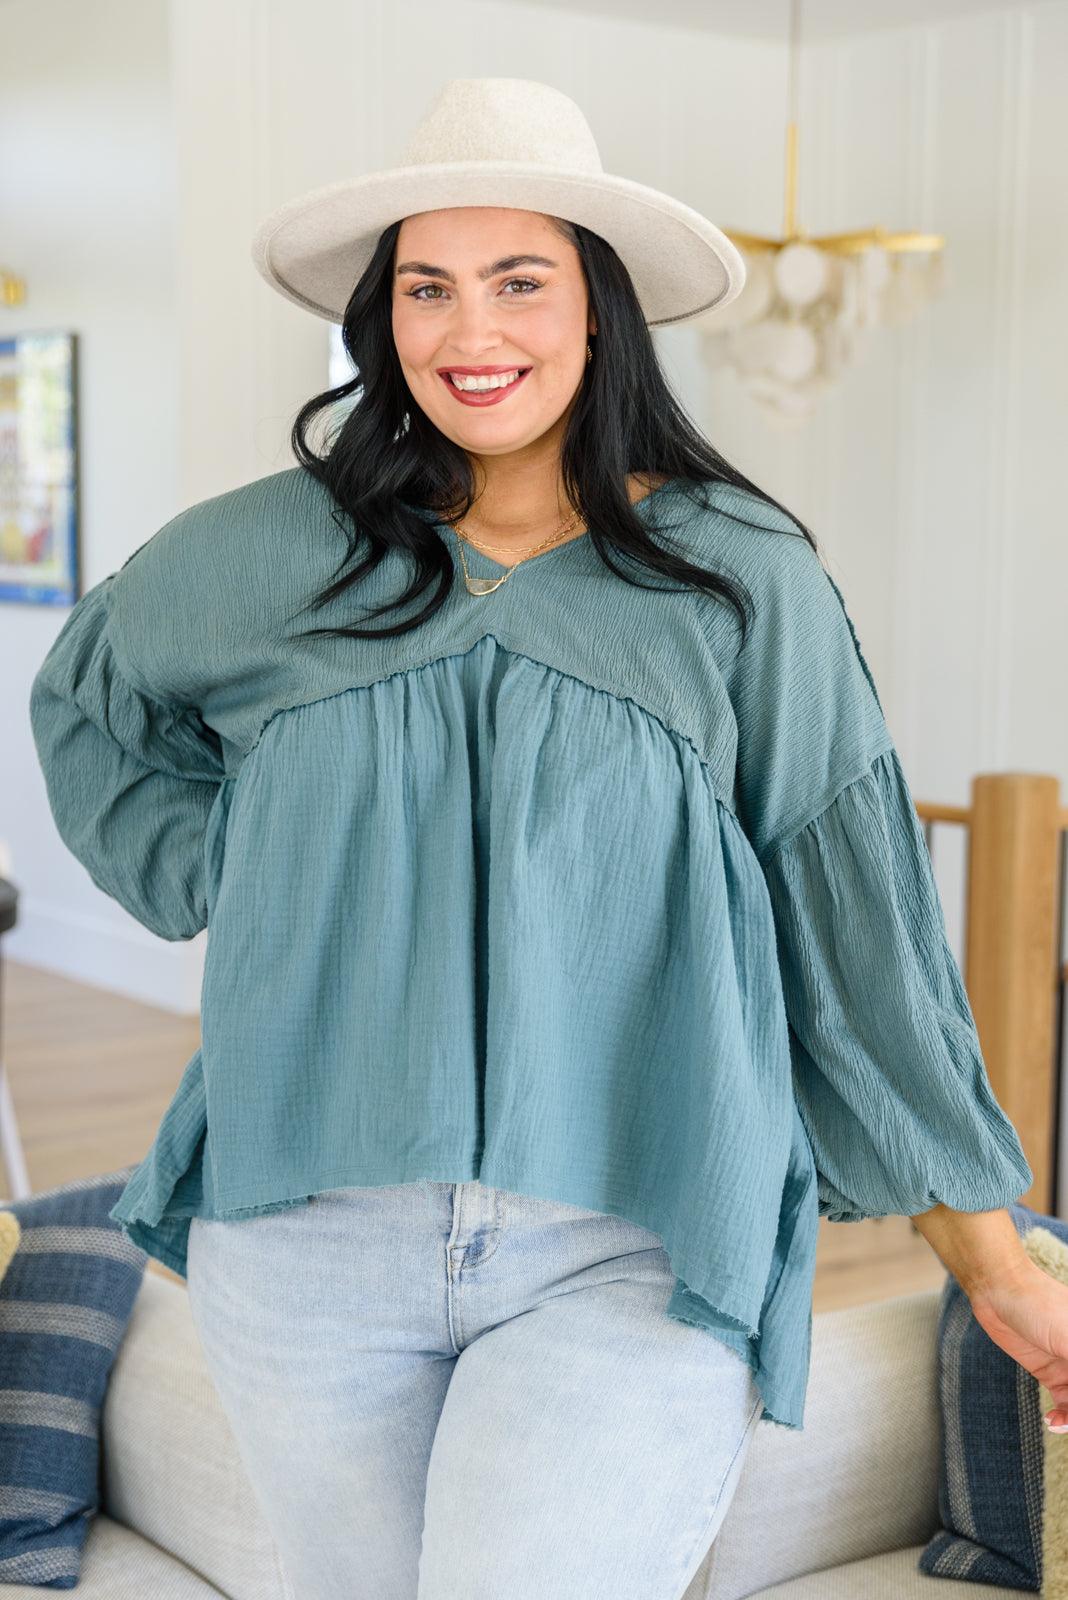 Teal Balloon Sleeve Babydoll Top - Lavender Latte Boutique